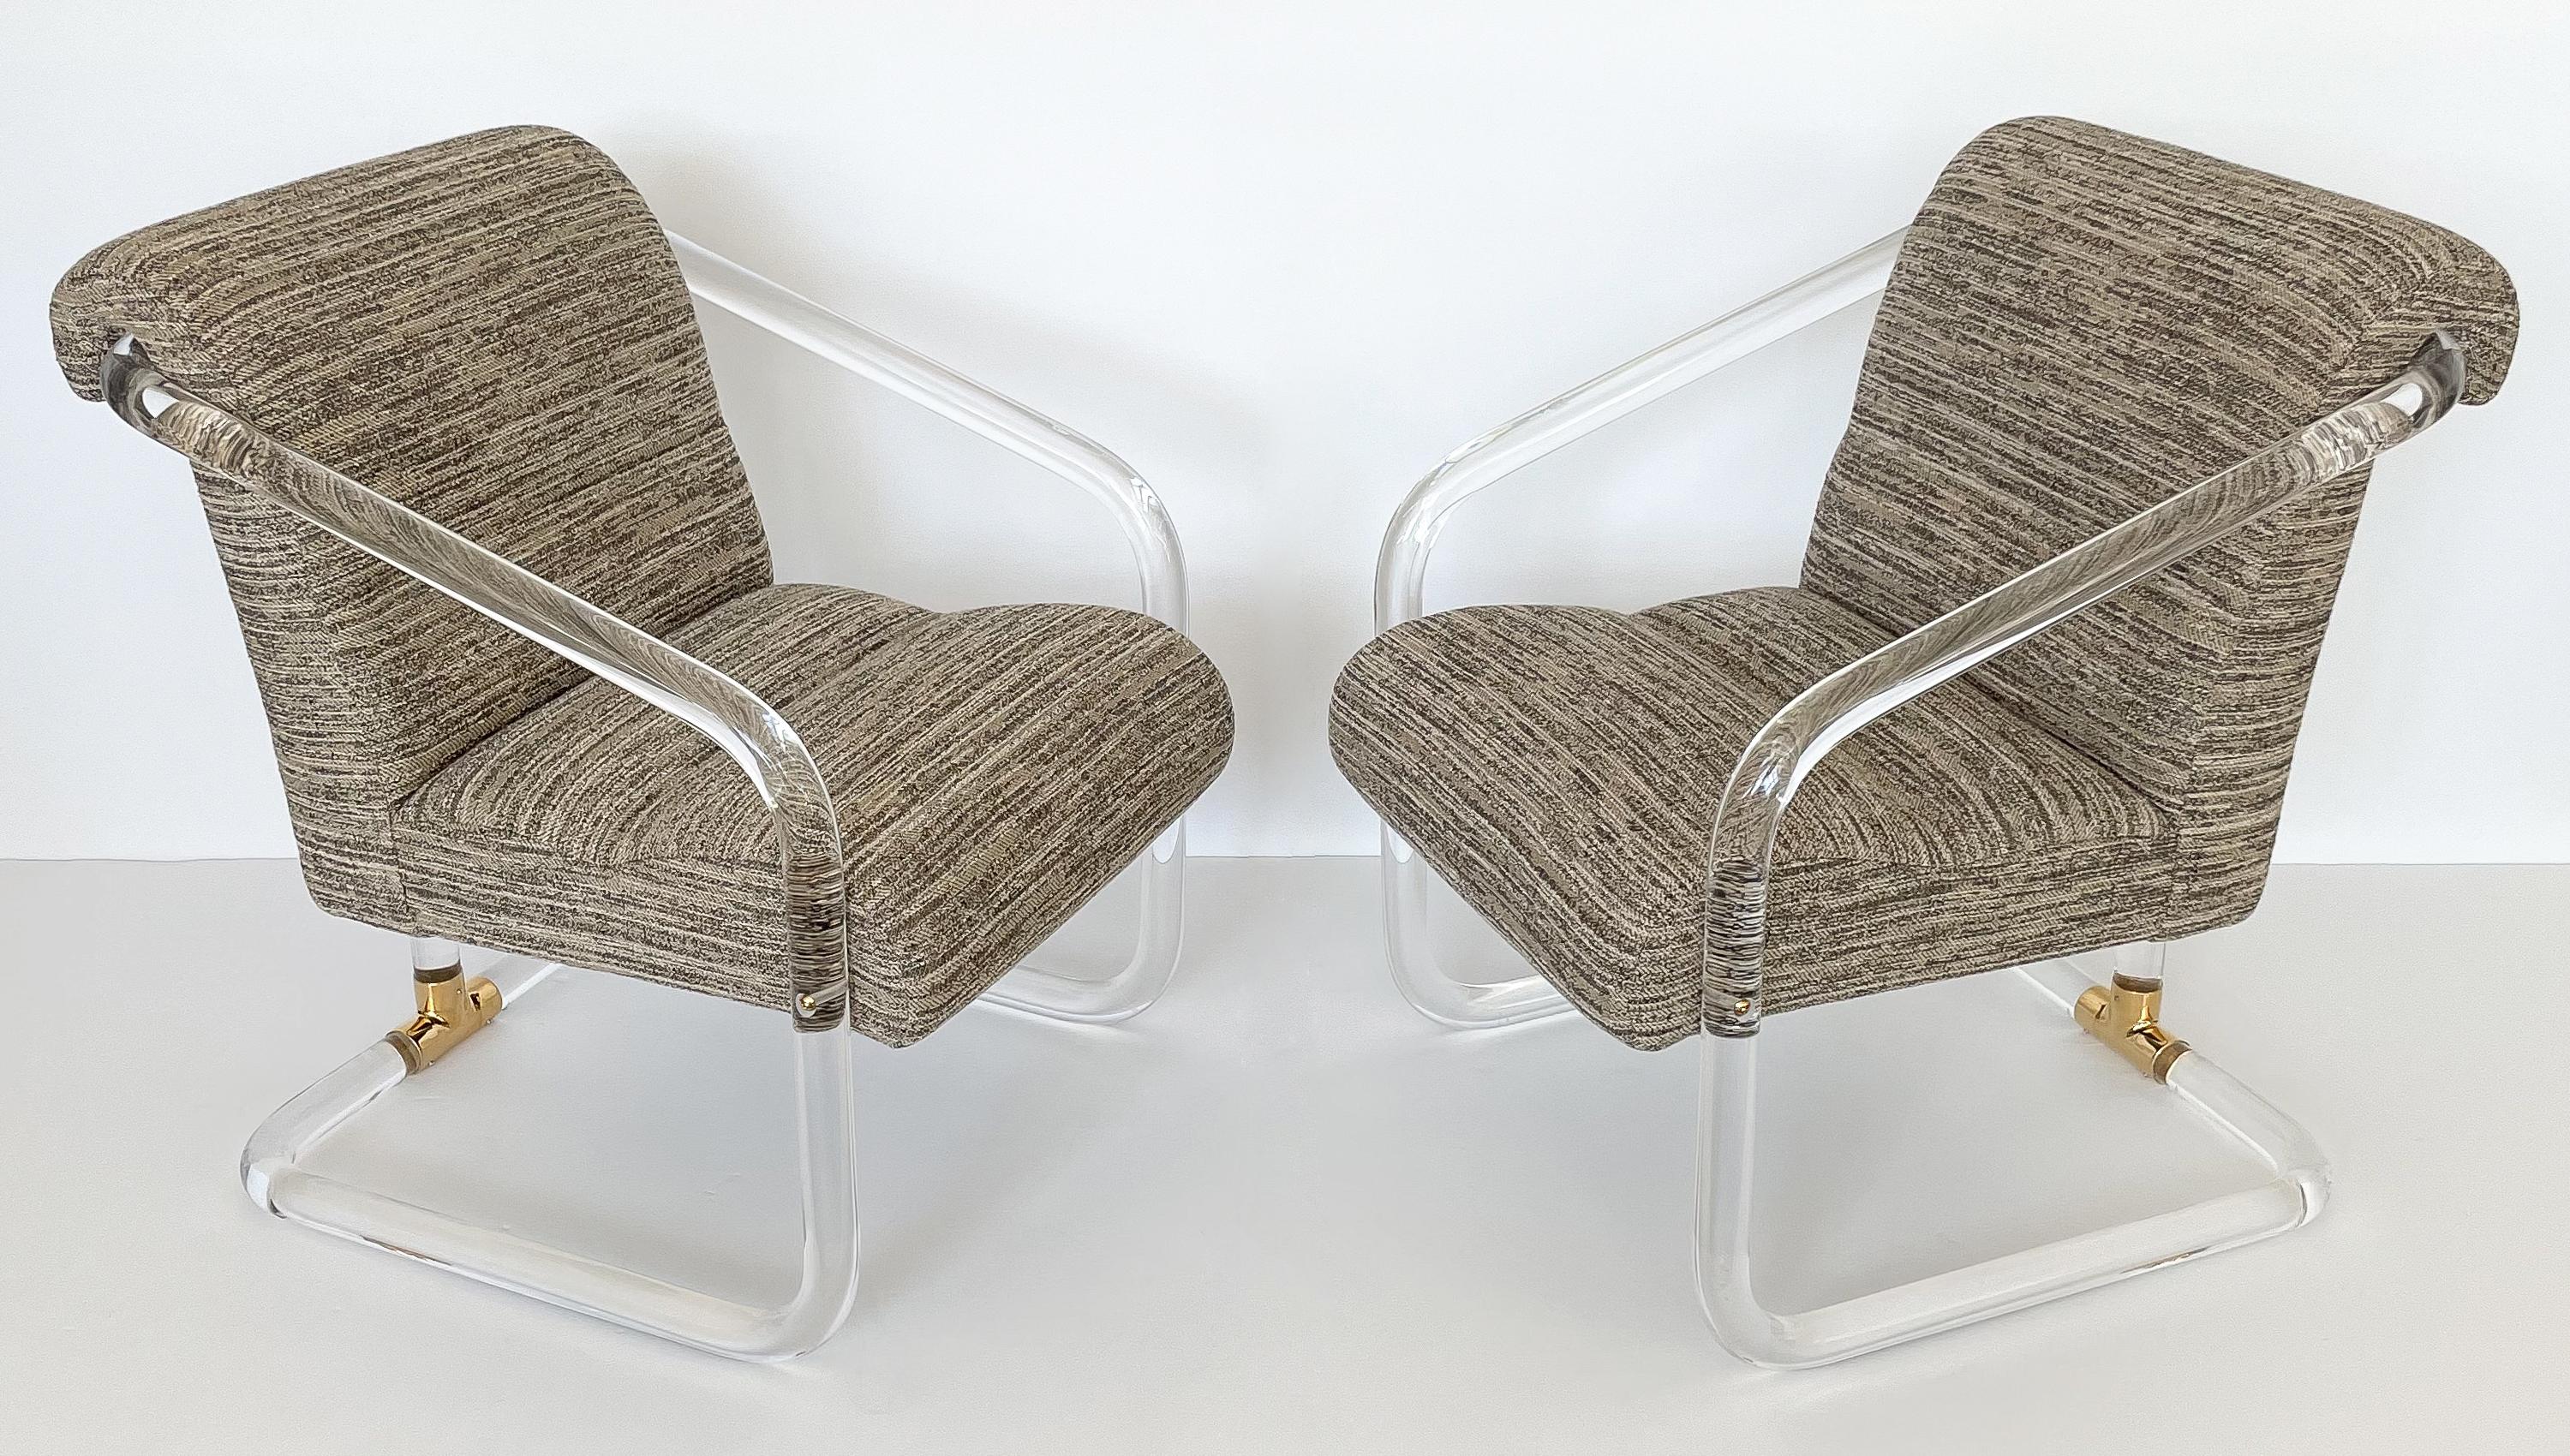 Pair of lucite and brass armchairs by Lion in Frost (Leon Frost), circa 1970s. These chairs feature a framework of bent 1.75